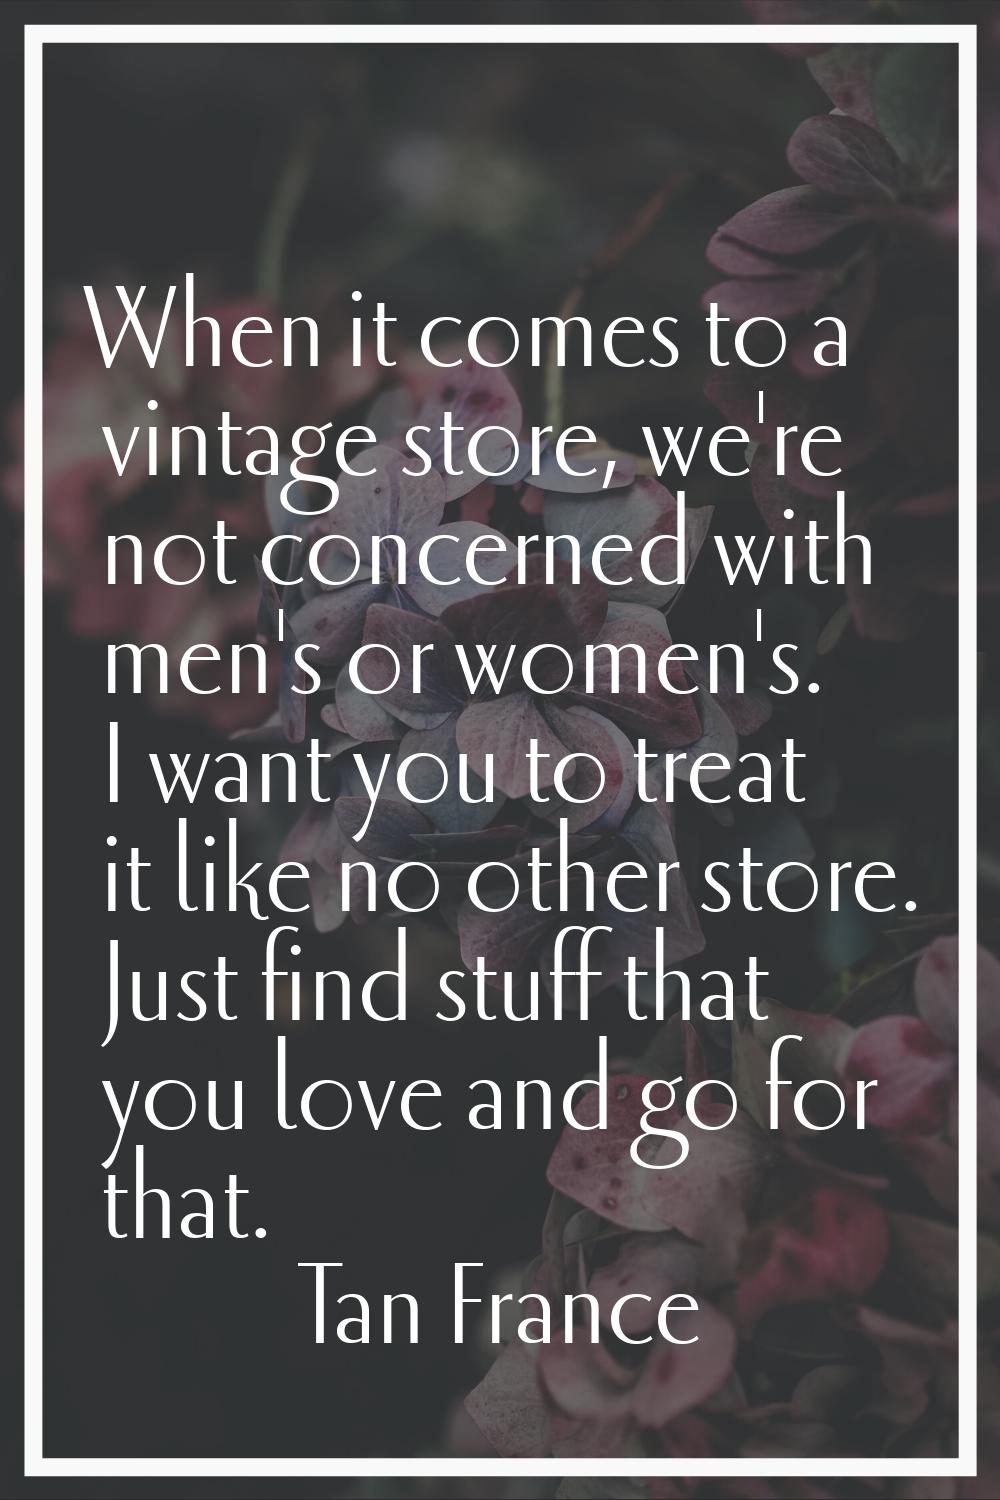 When it comes to a vintage store, we're not concerned with men's or women's. I want you to treat it